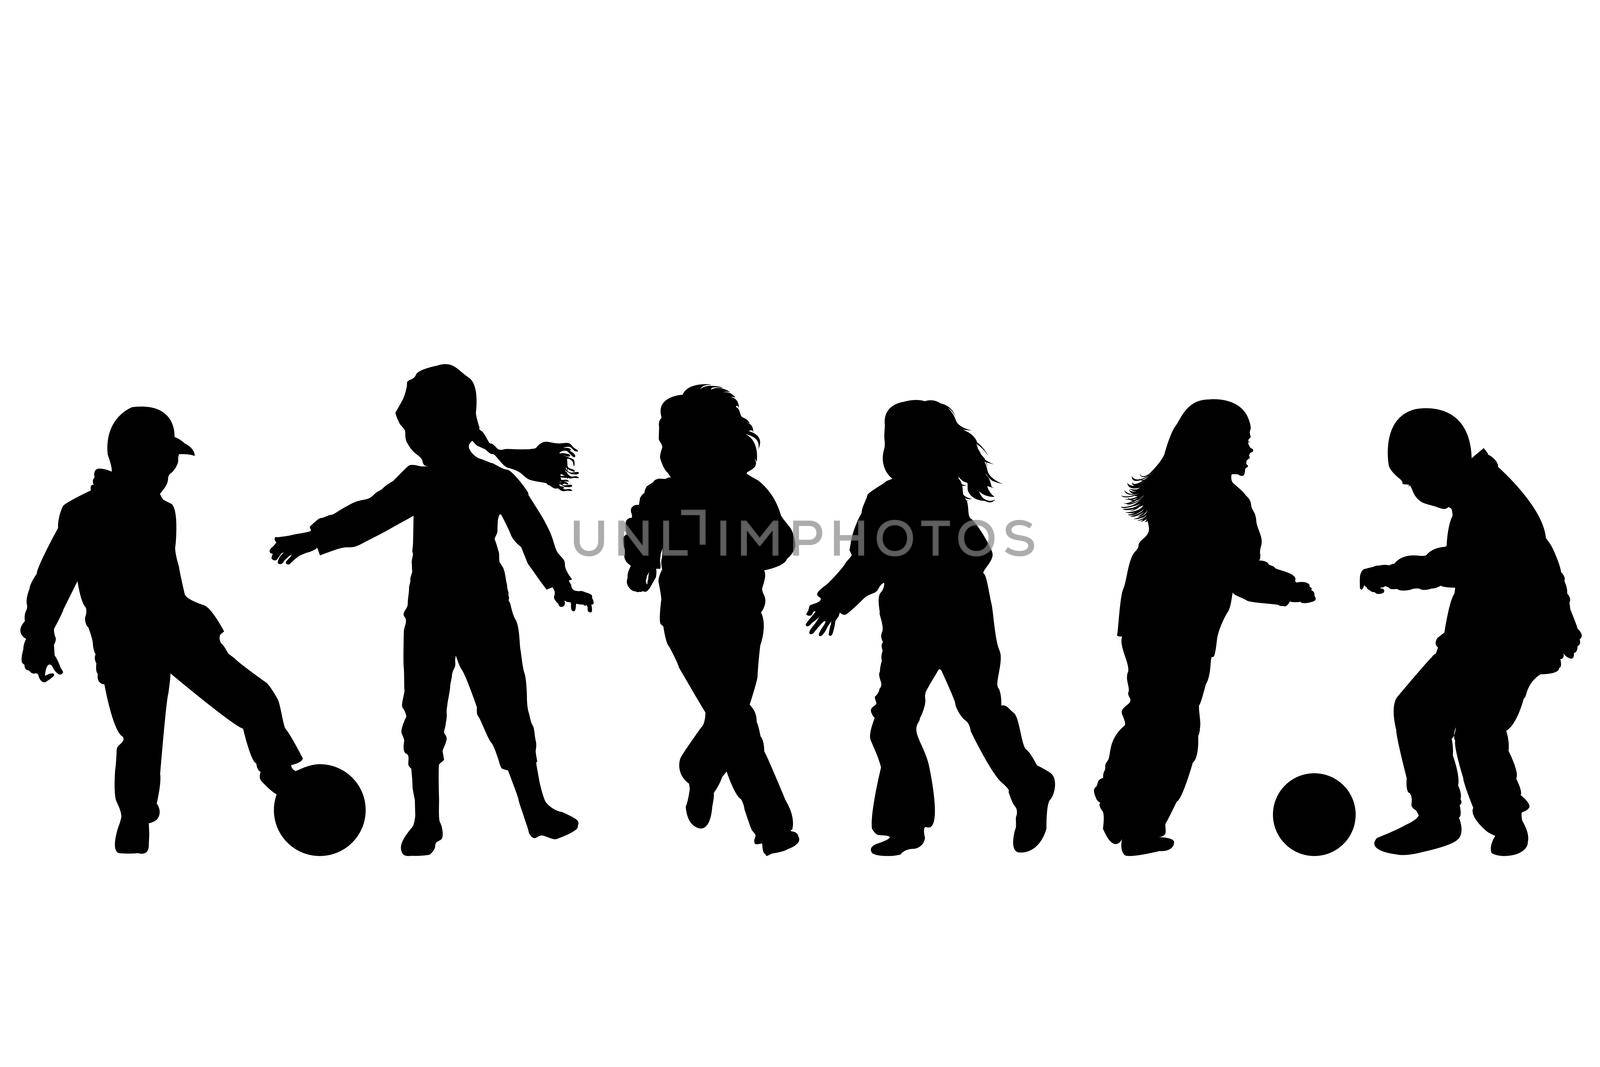 Black silhouettes of children playing isolated on white background by hibrida13